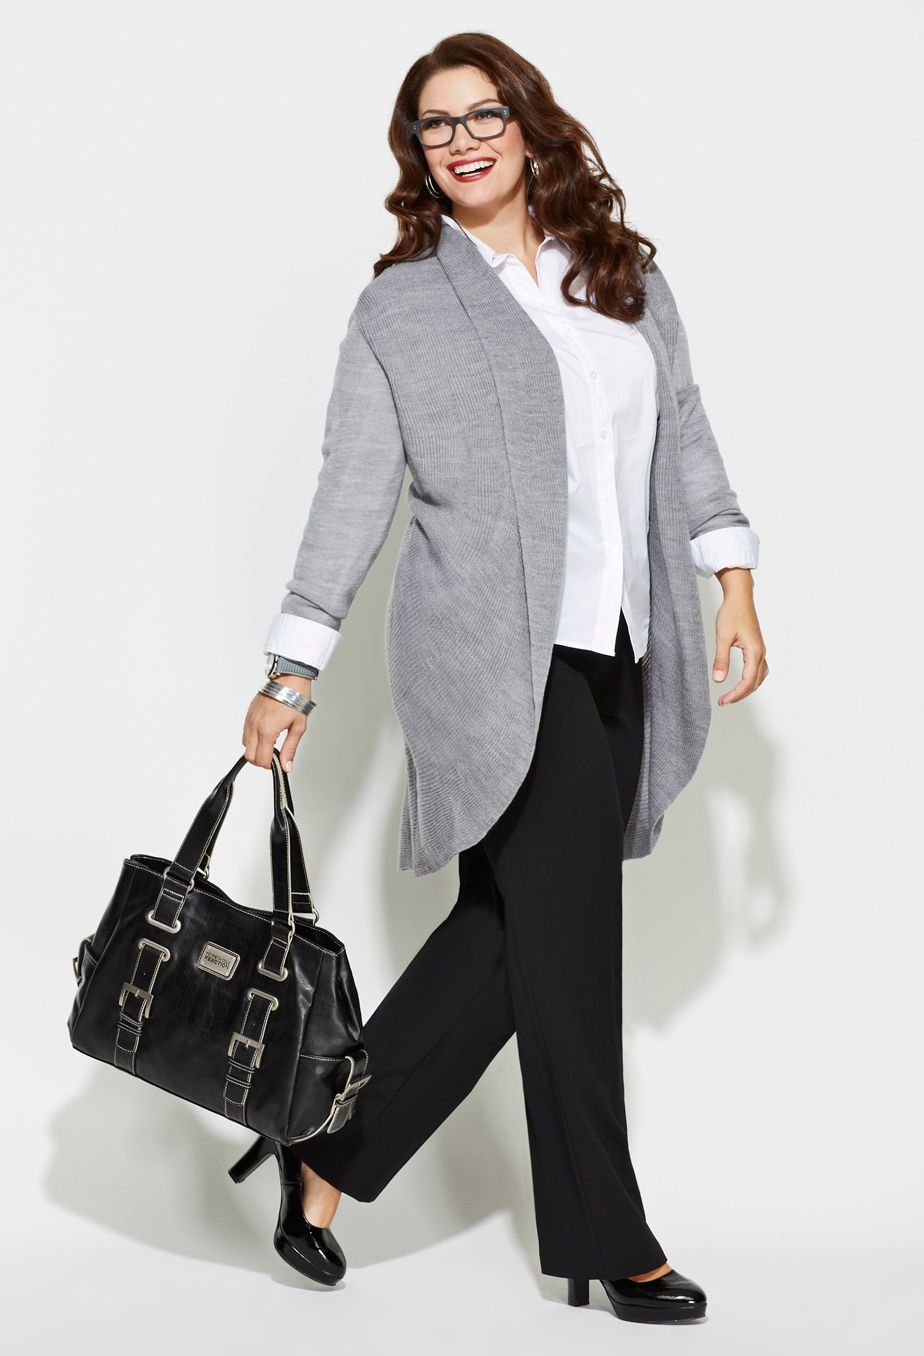 Classic business wear 115+ Elegant Work Outfit Ideas for Plus Size Ladies - 1